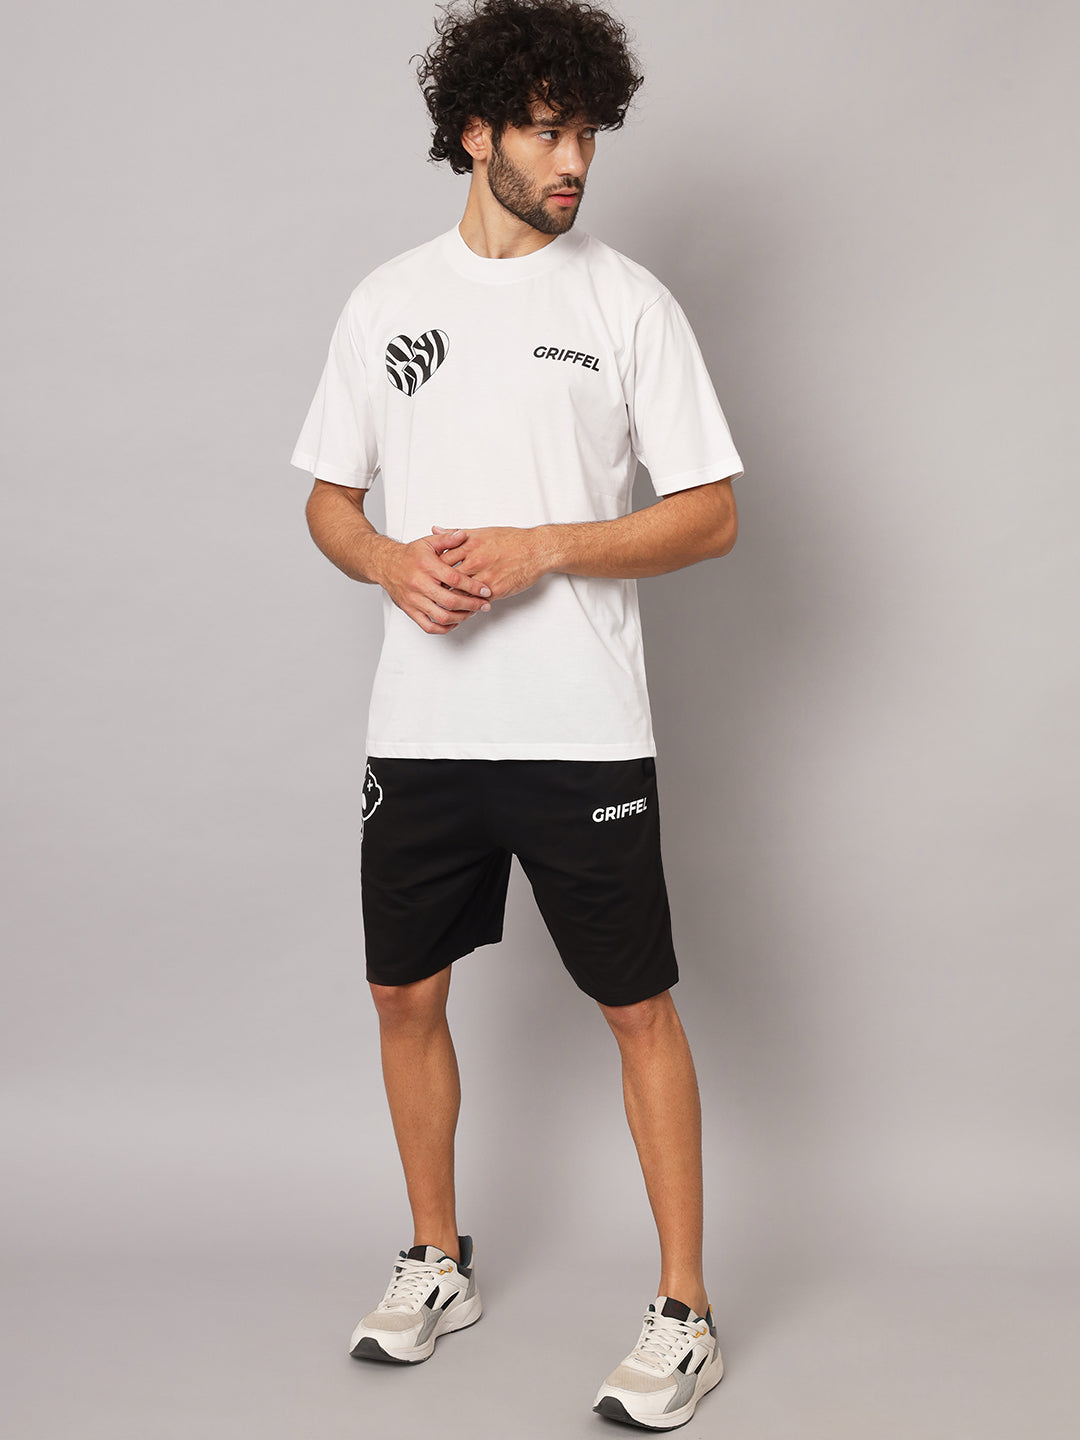 GRIFFEL Men Printed White Loose fit T-shirt and Short Set - griffel